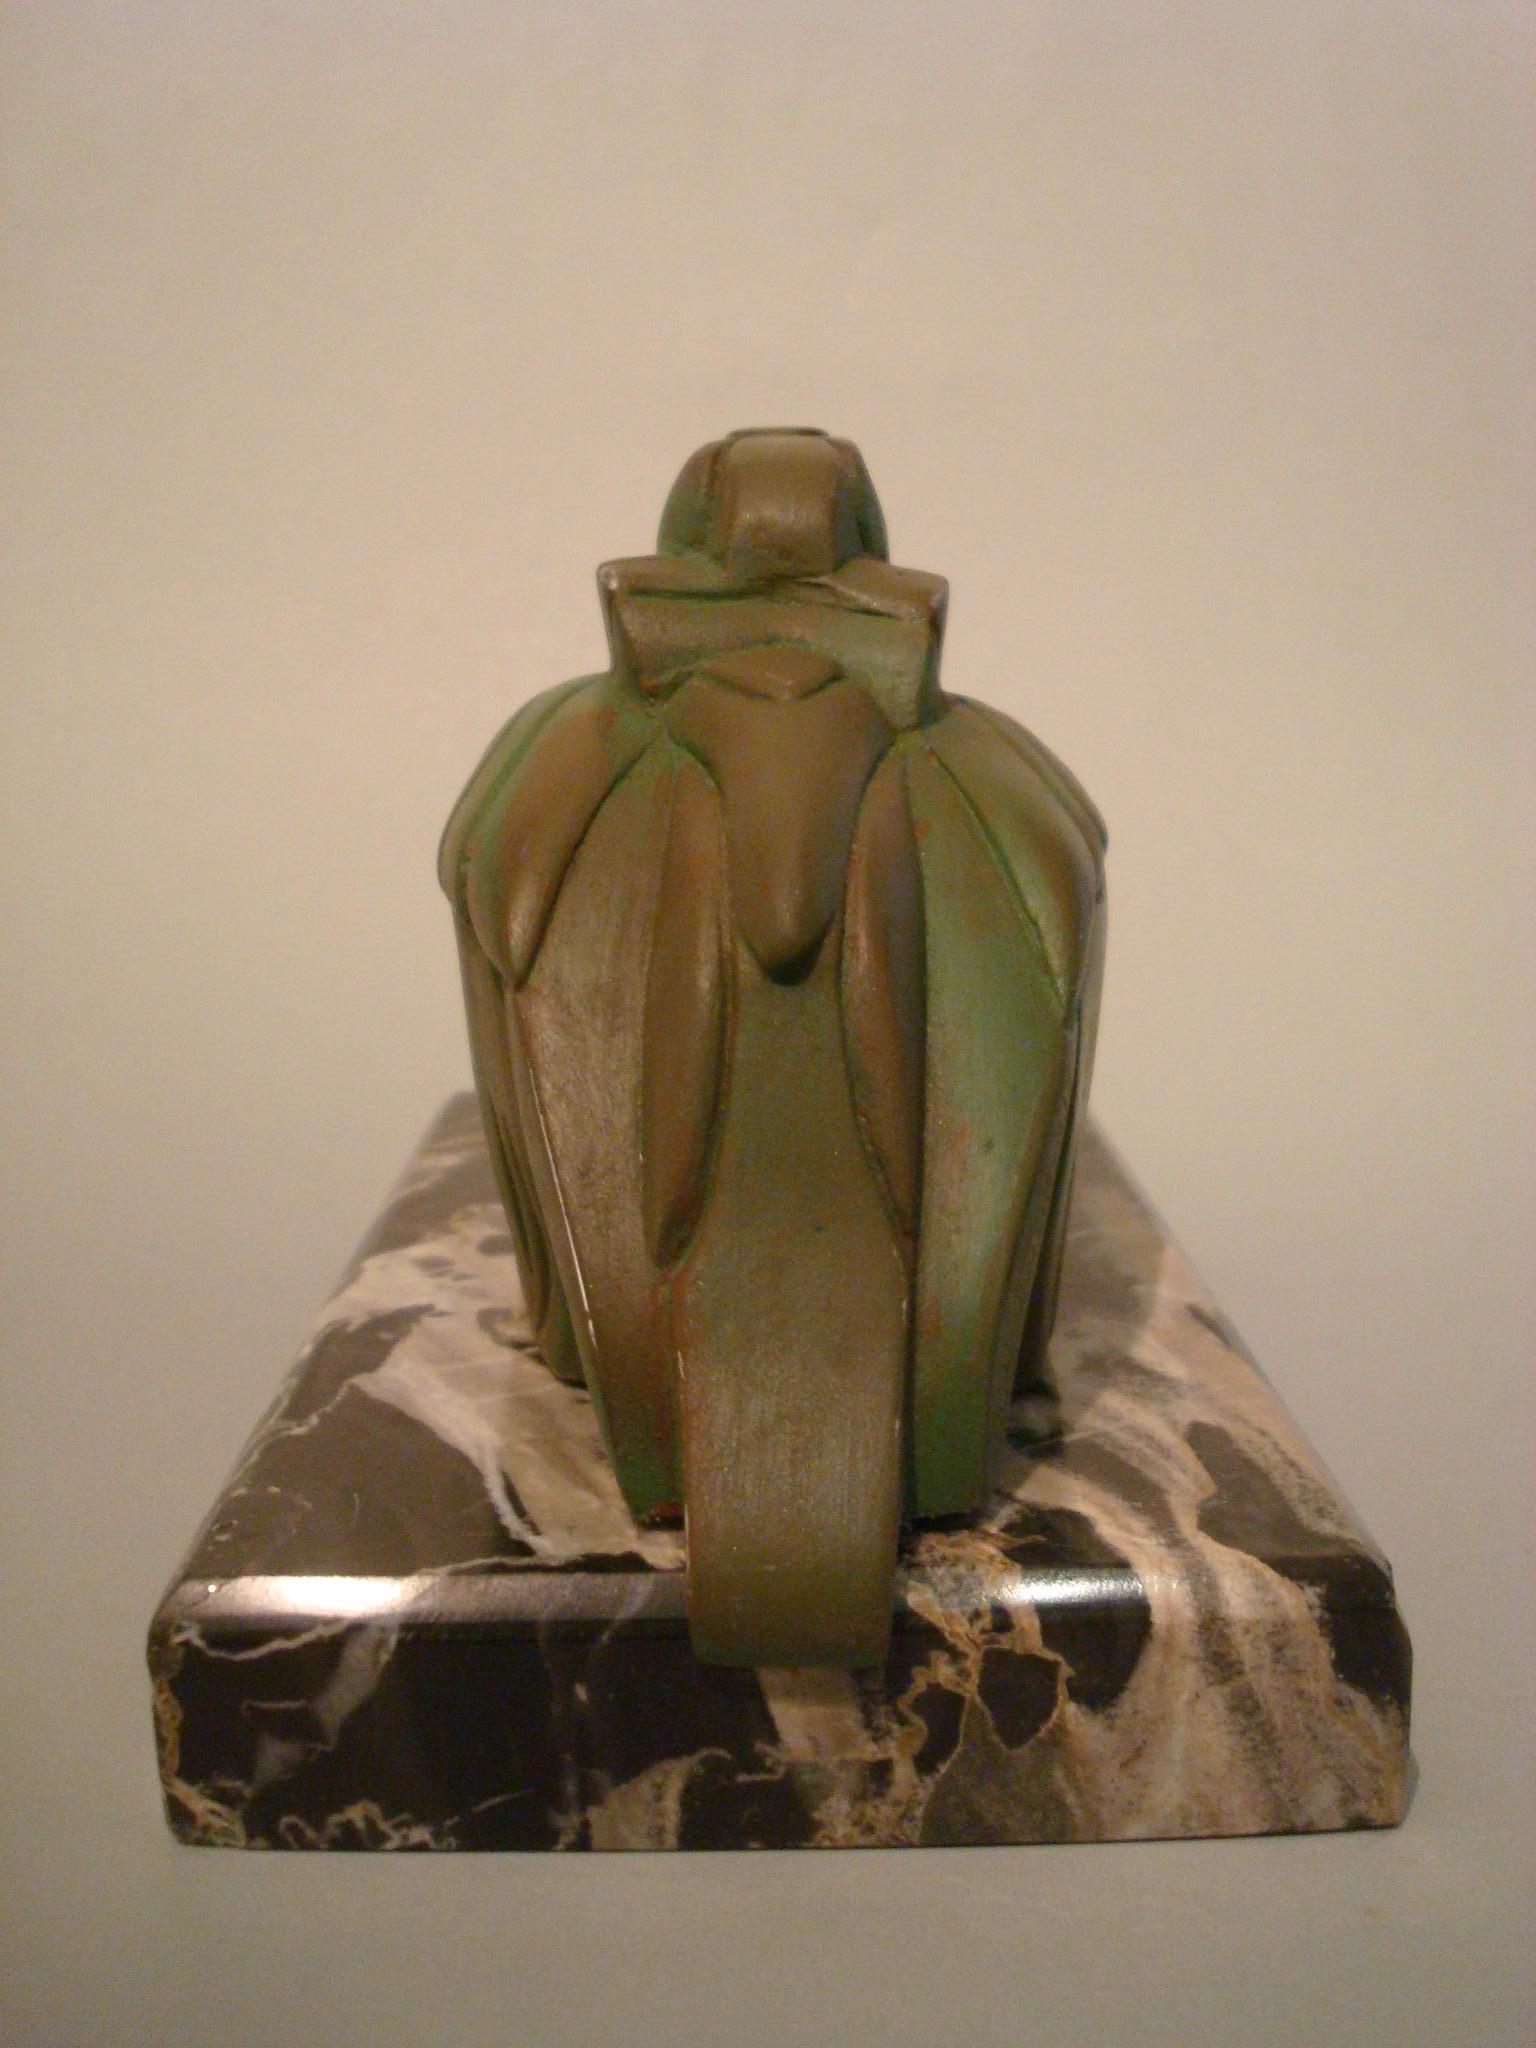 French Art Deco Cubist Pelican Paperweight Desk Sculpture by G.H. Laurent, France, 1925 For Sale